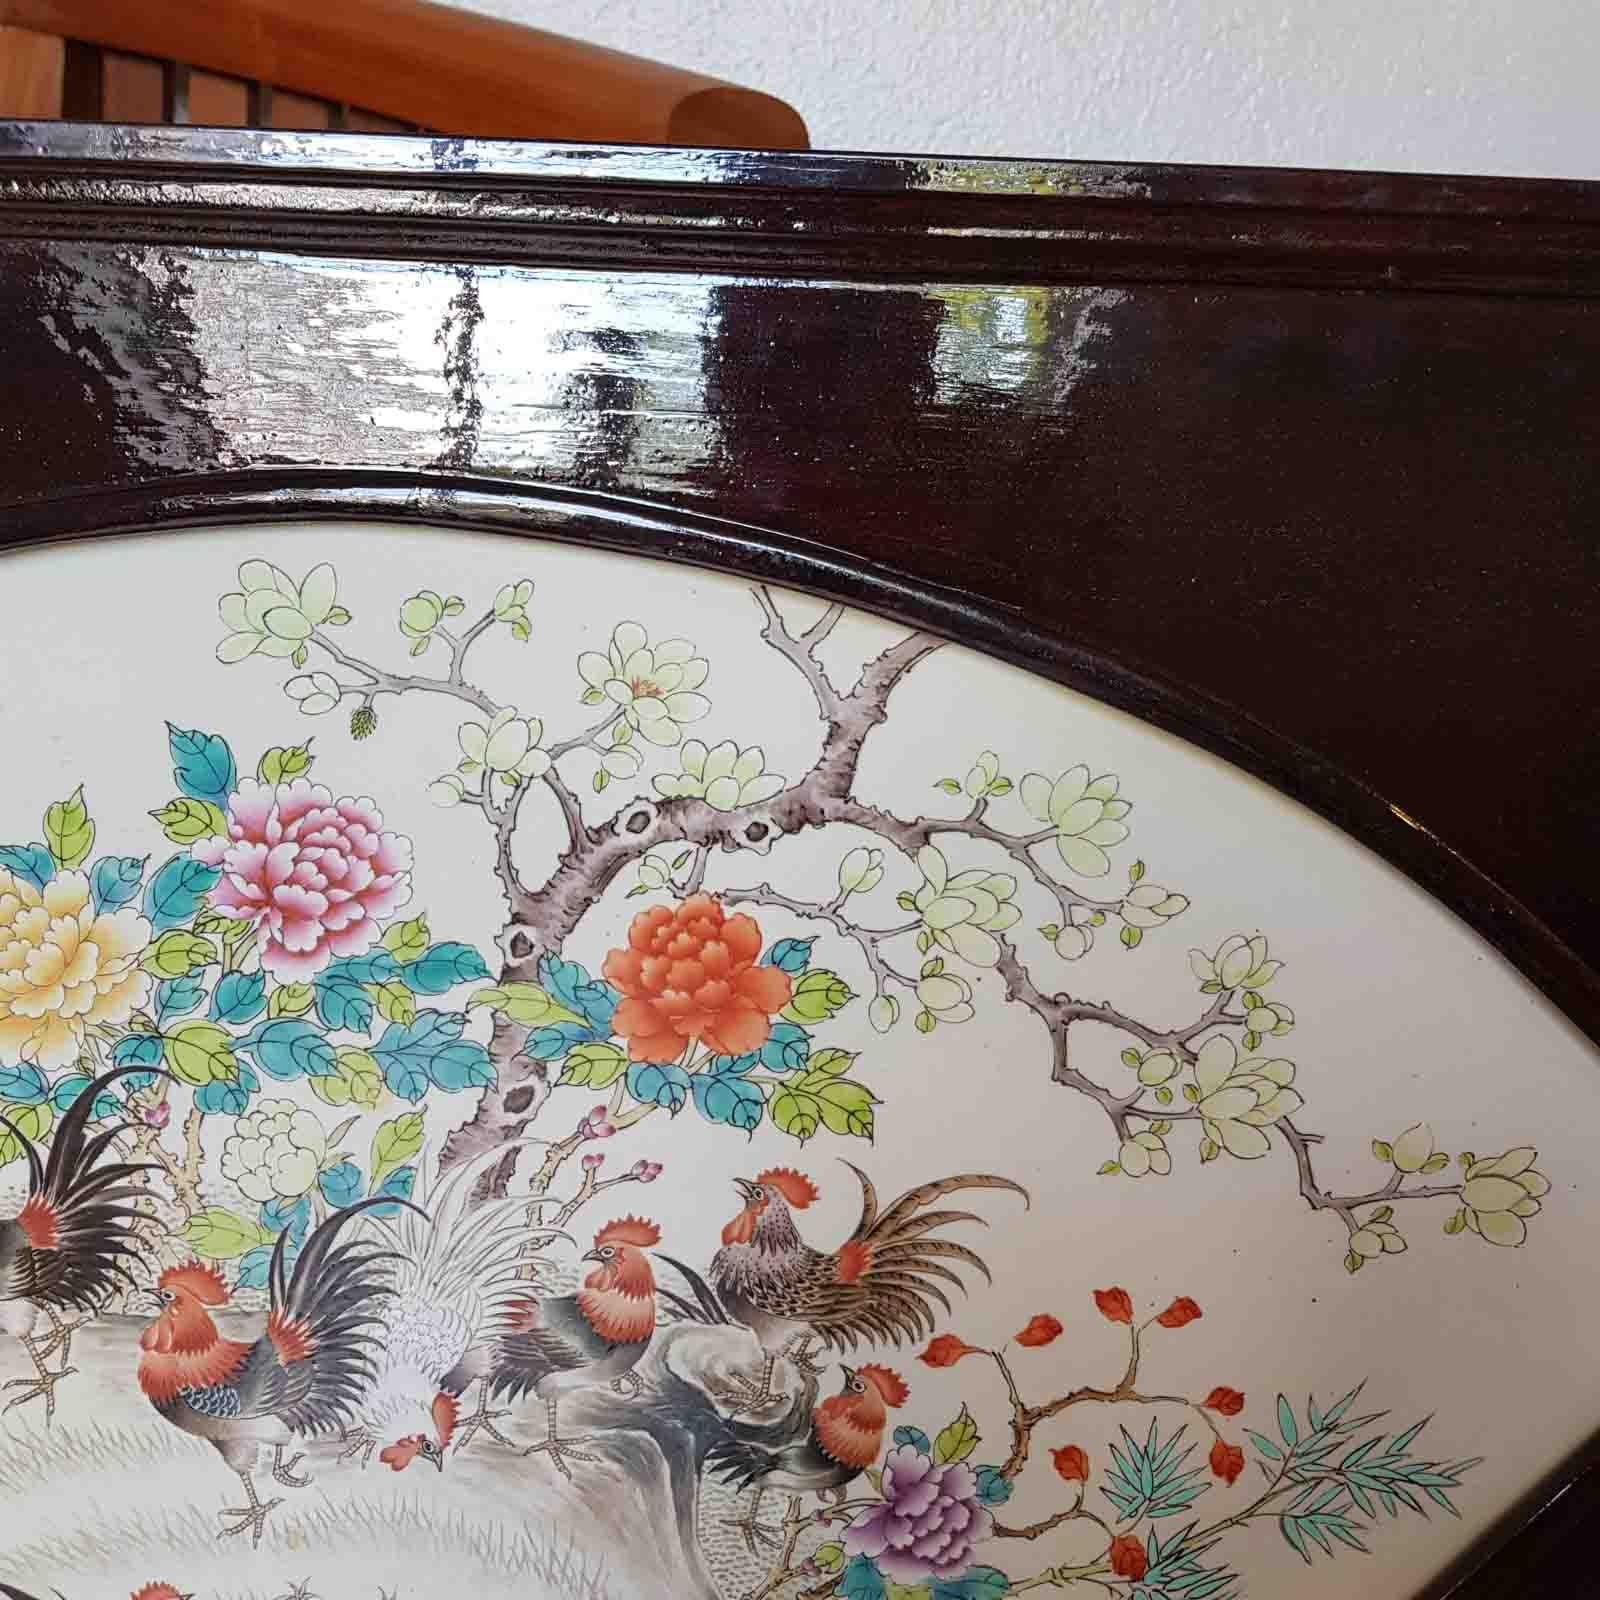 20th Century 20C Large Chinese Porcelain Plaque Painting Roosters in Garden Calligraphy For Sale